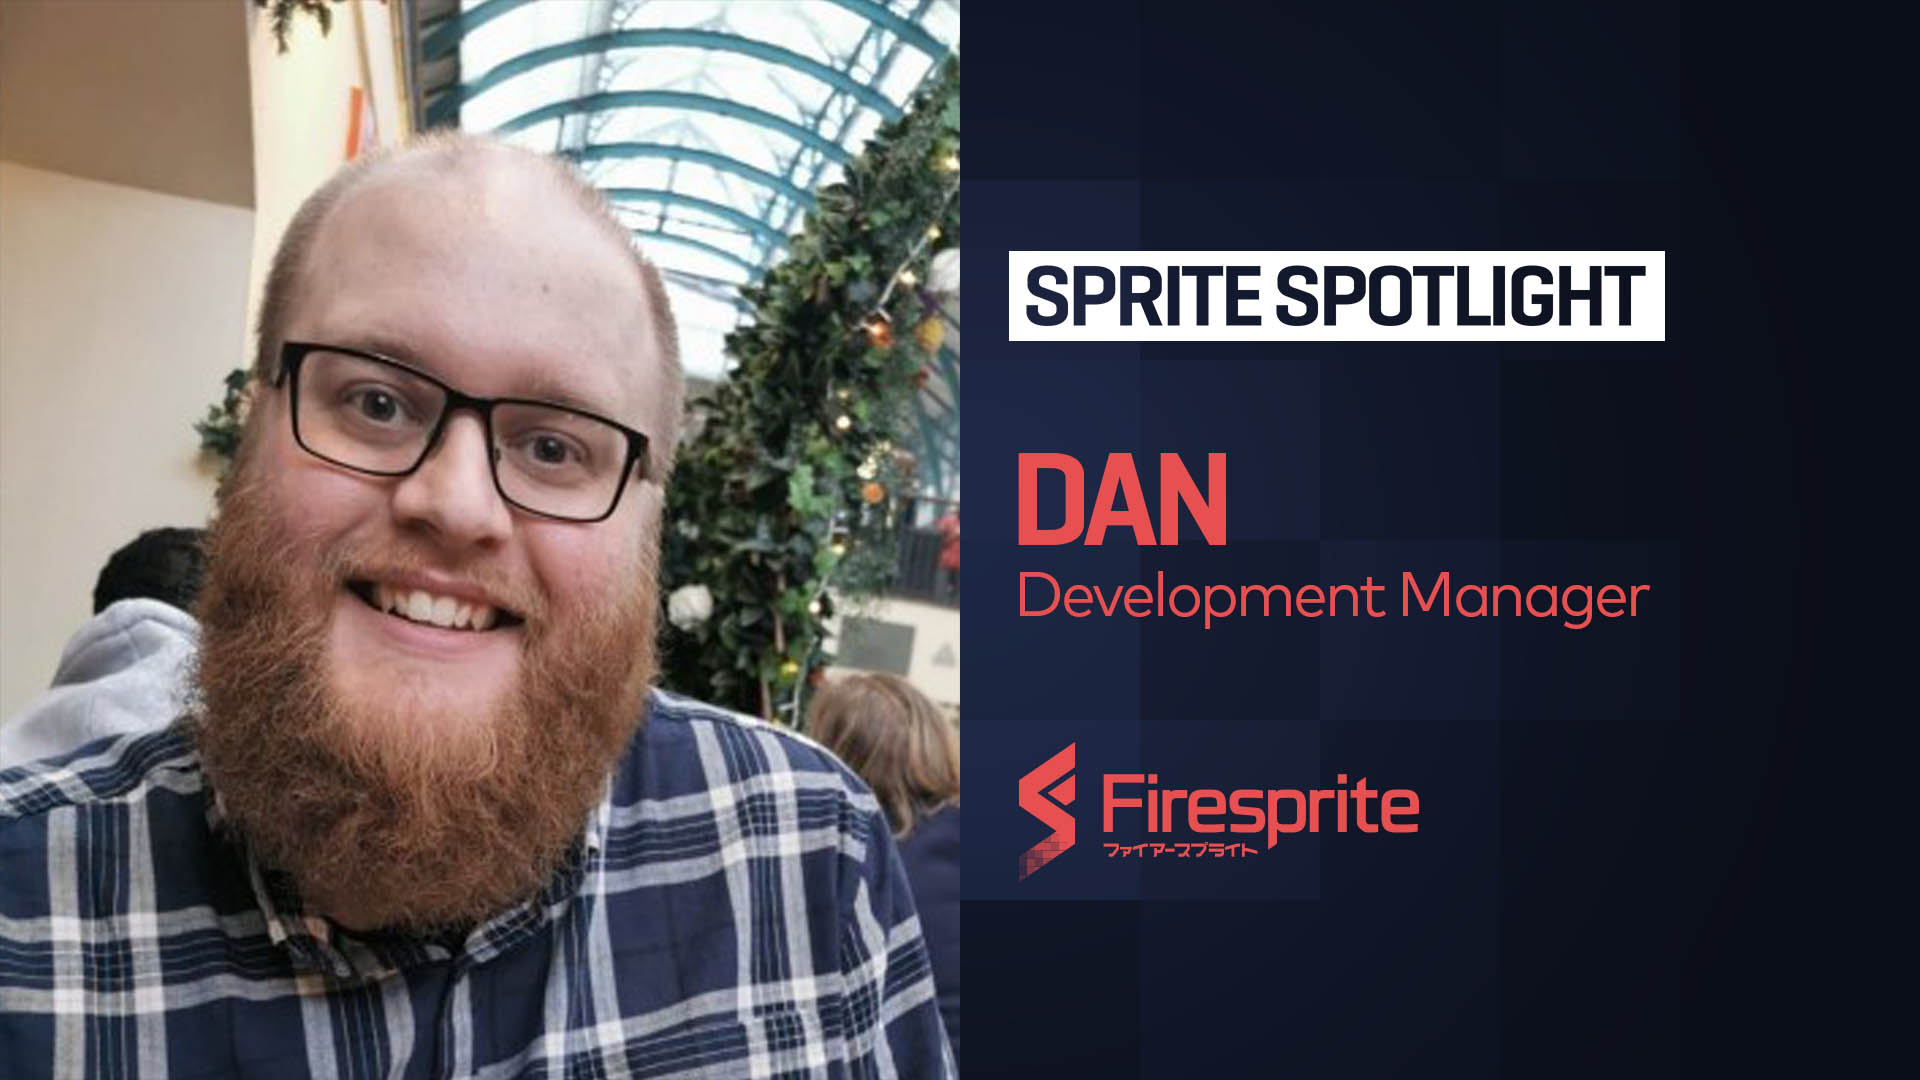 Person smiling at camera for portrait photo to discuss games industry topics and their role in video games. Today’s ‘sprite spotlight’ is Dan,Development Manager at Firesprite. 